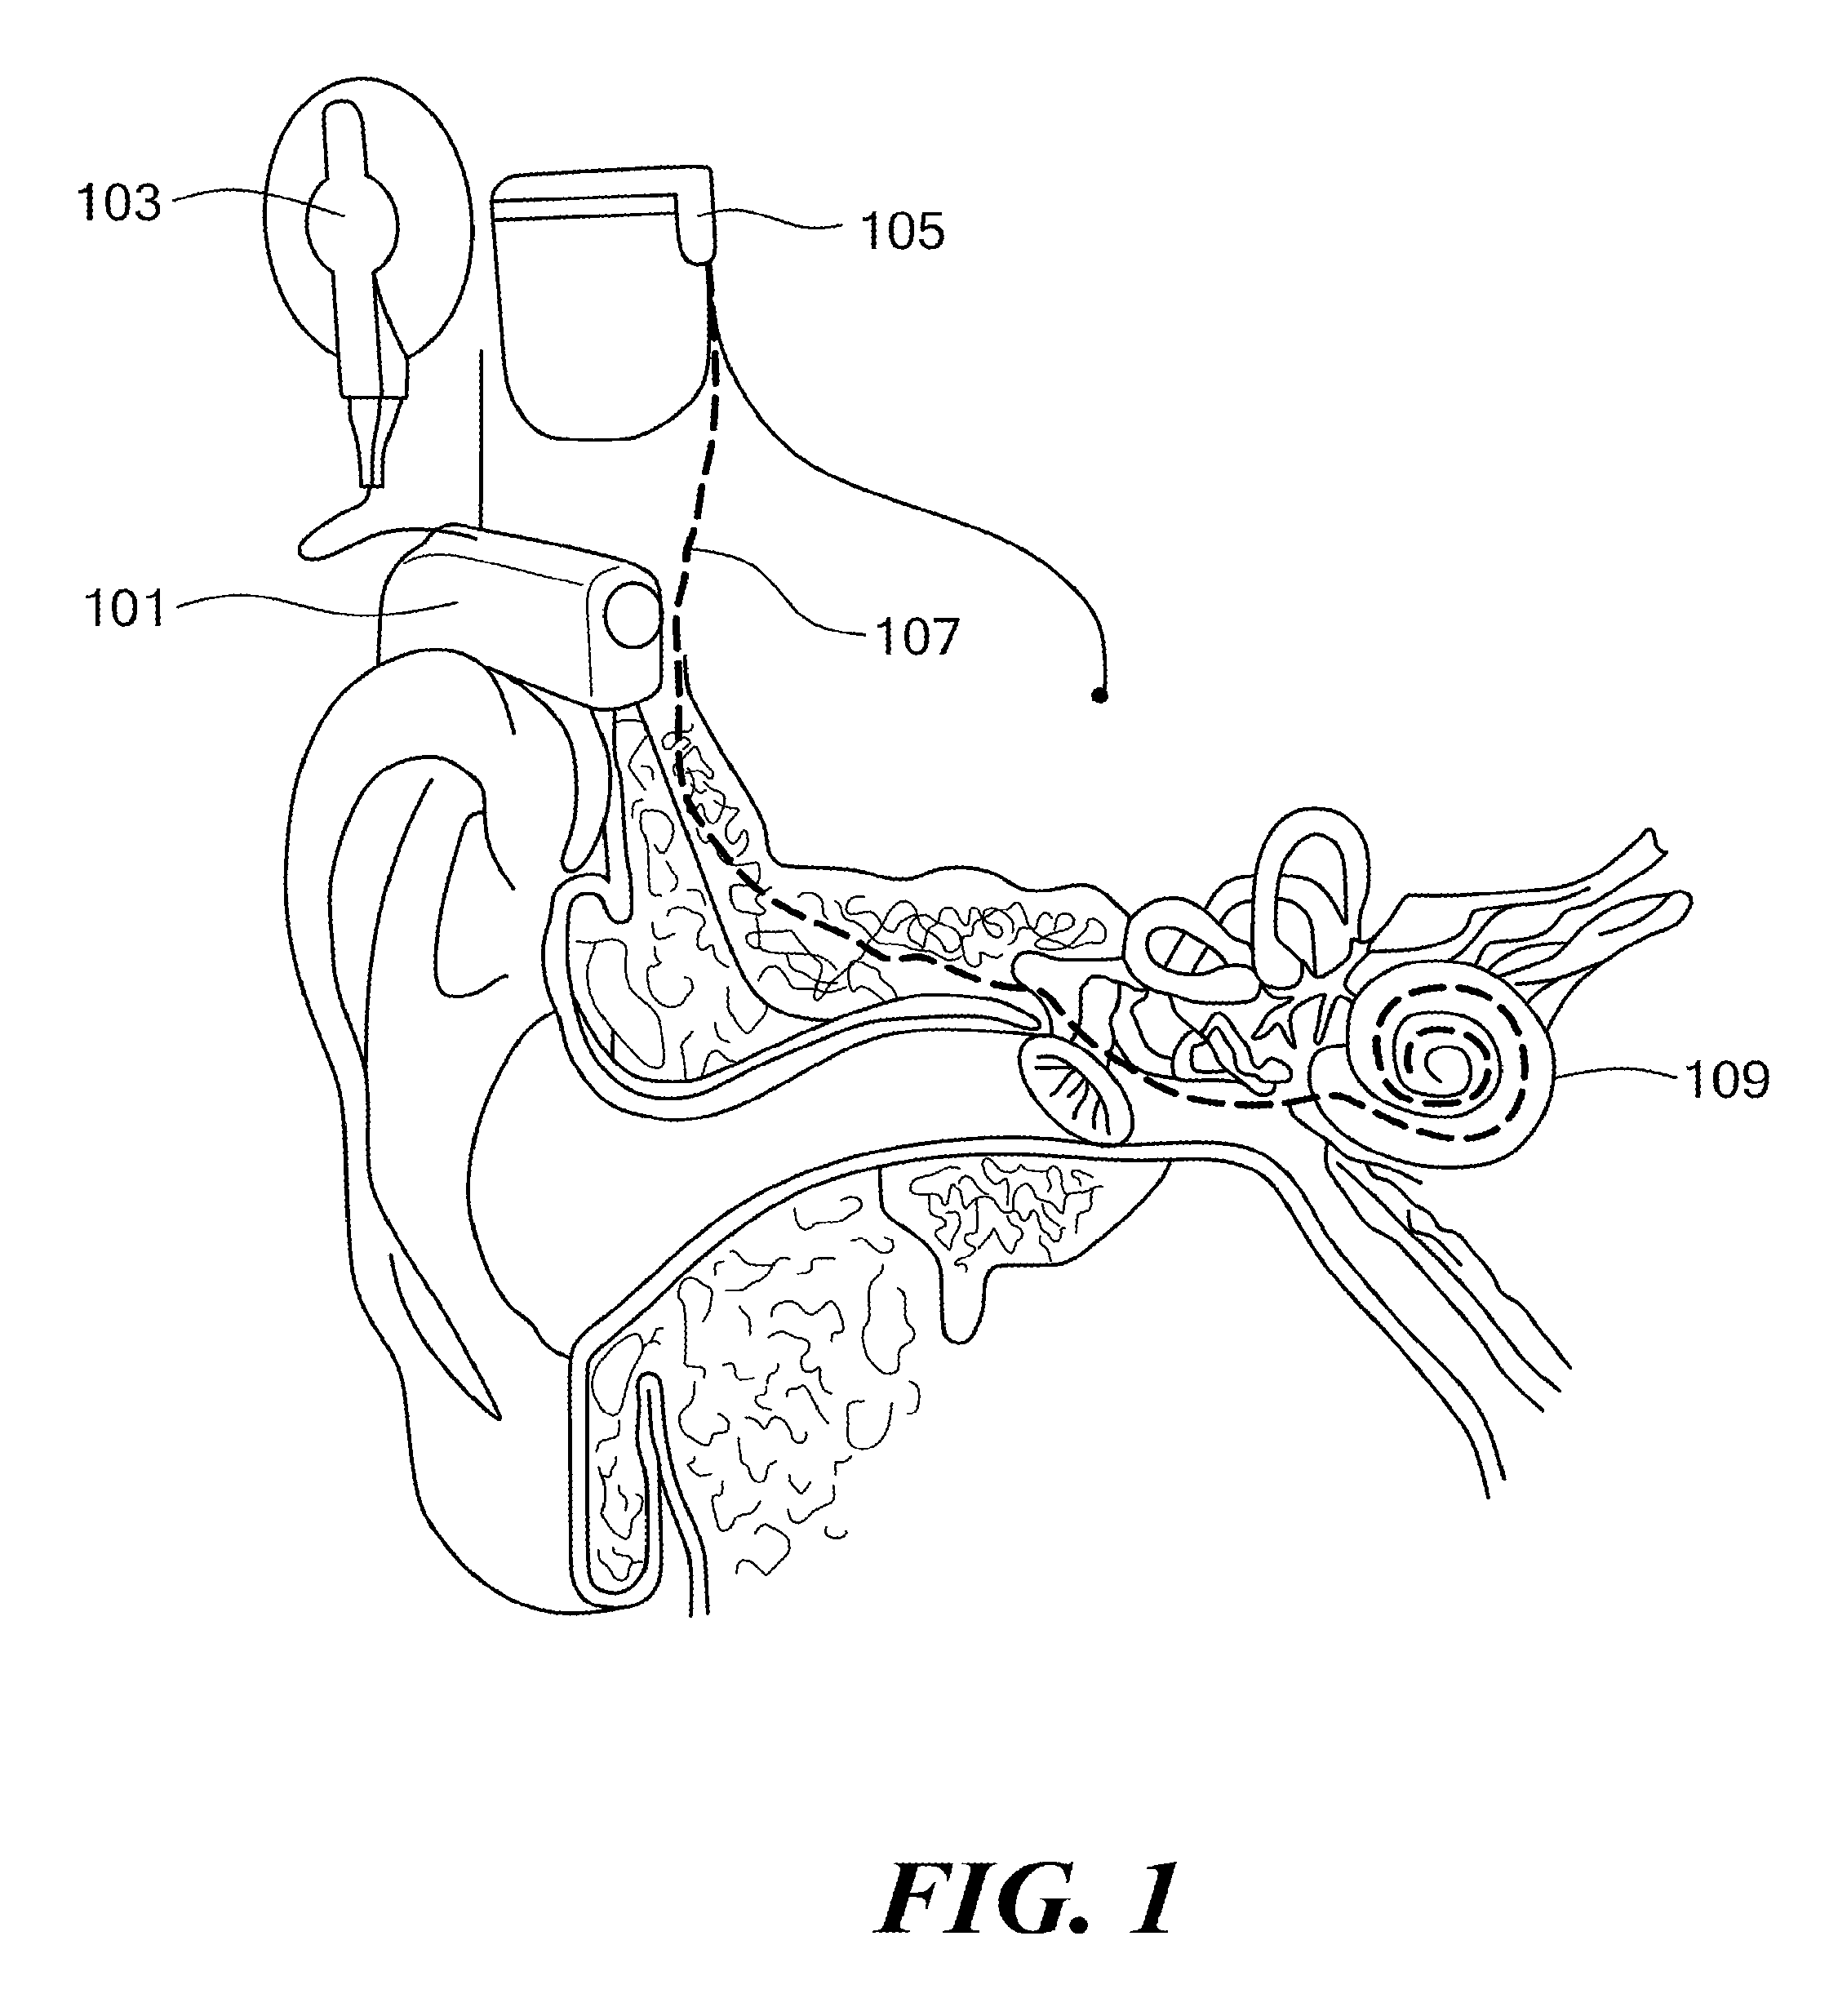 Cochlear implant stimulation with variable number of electrodes